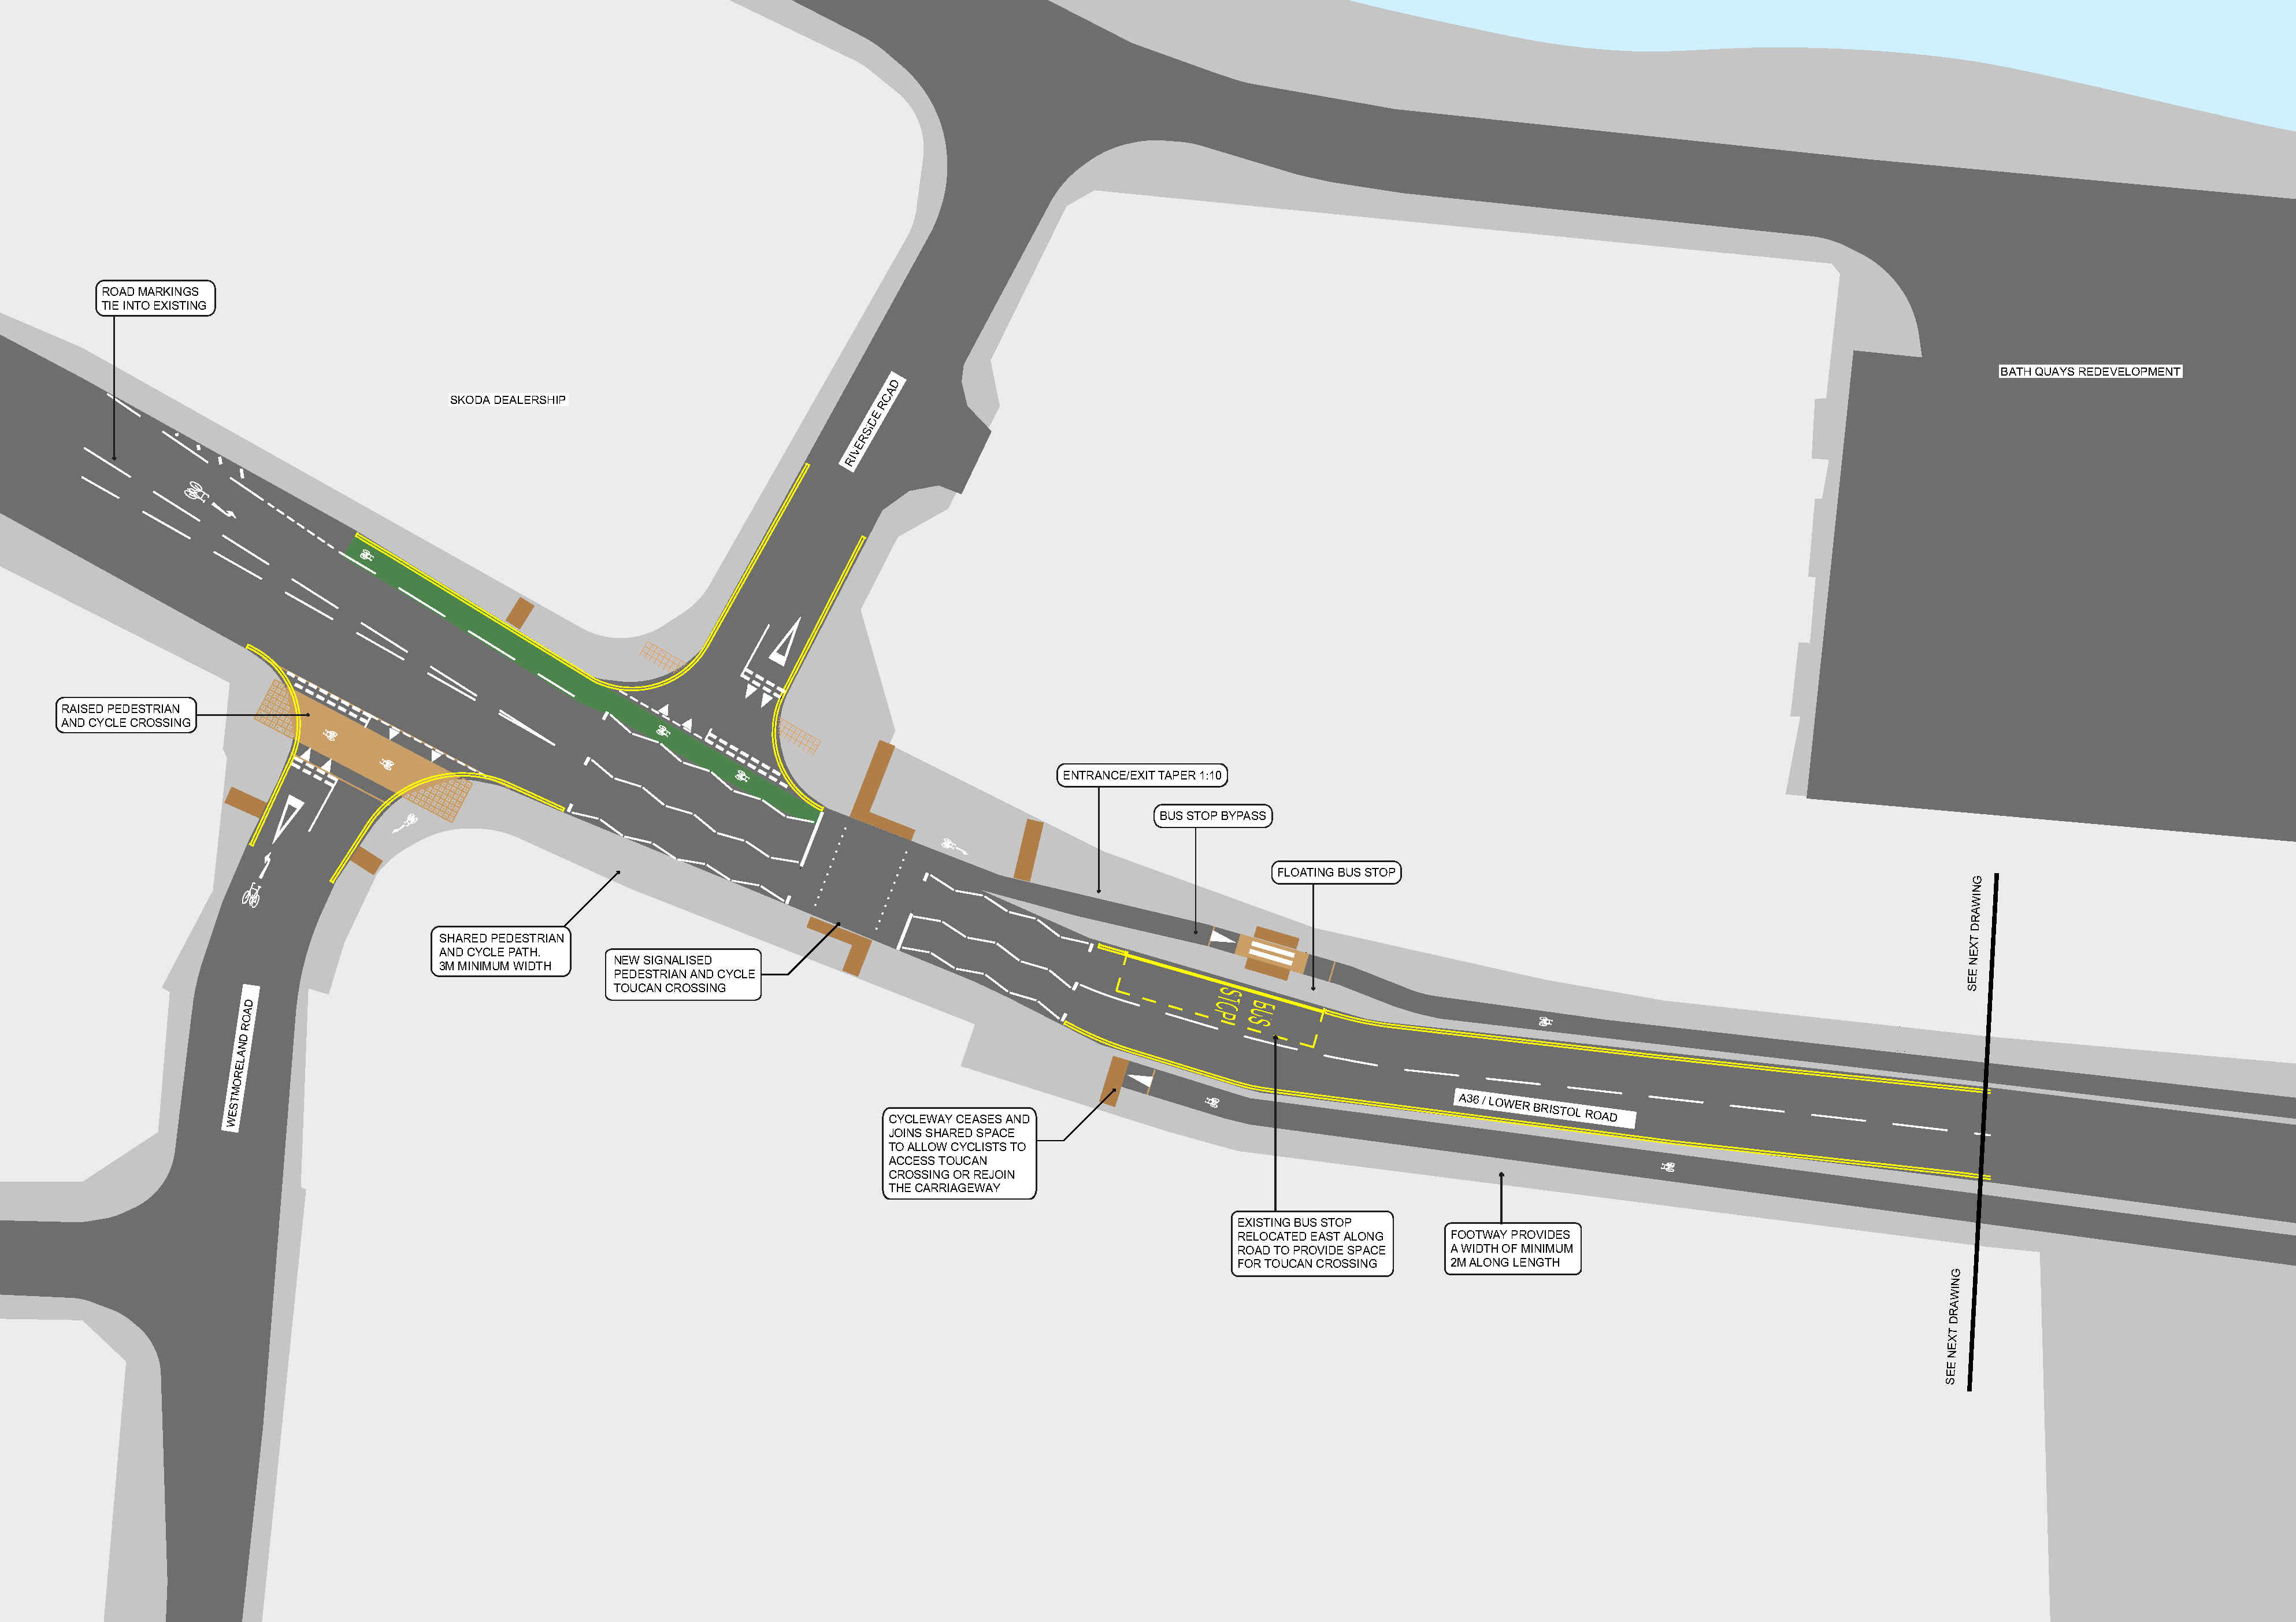 Map of section 1 of the proposed improvements to Lower Bristol Road as part of the Bath Quays Links project.